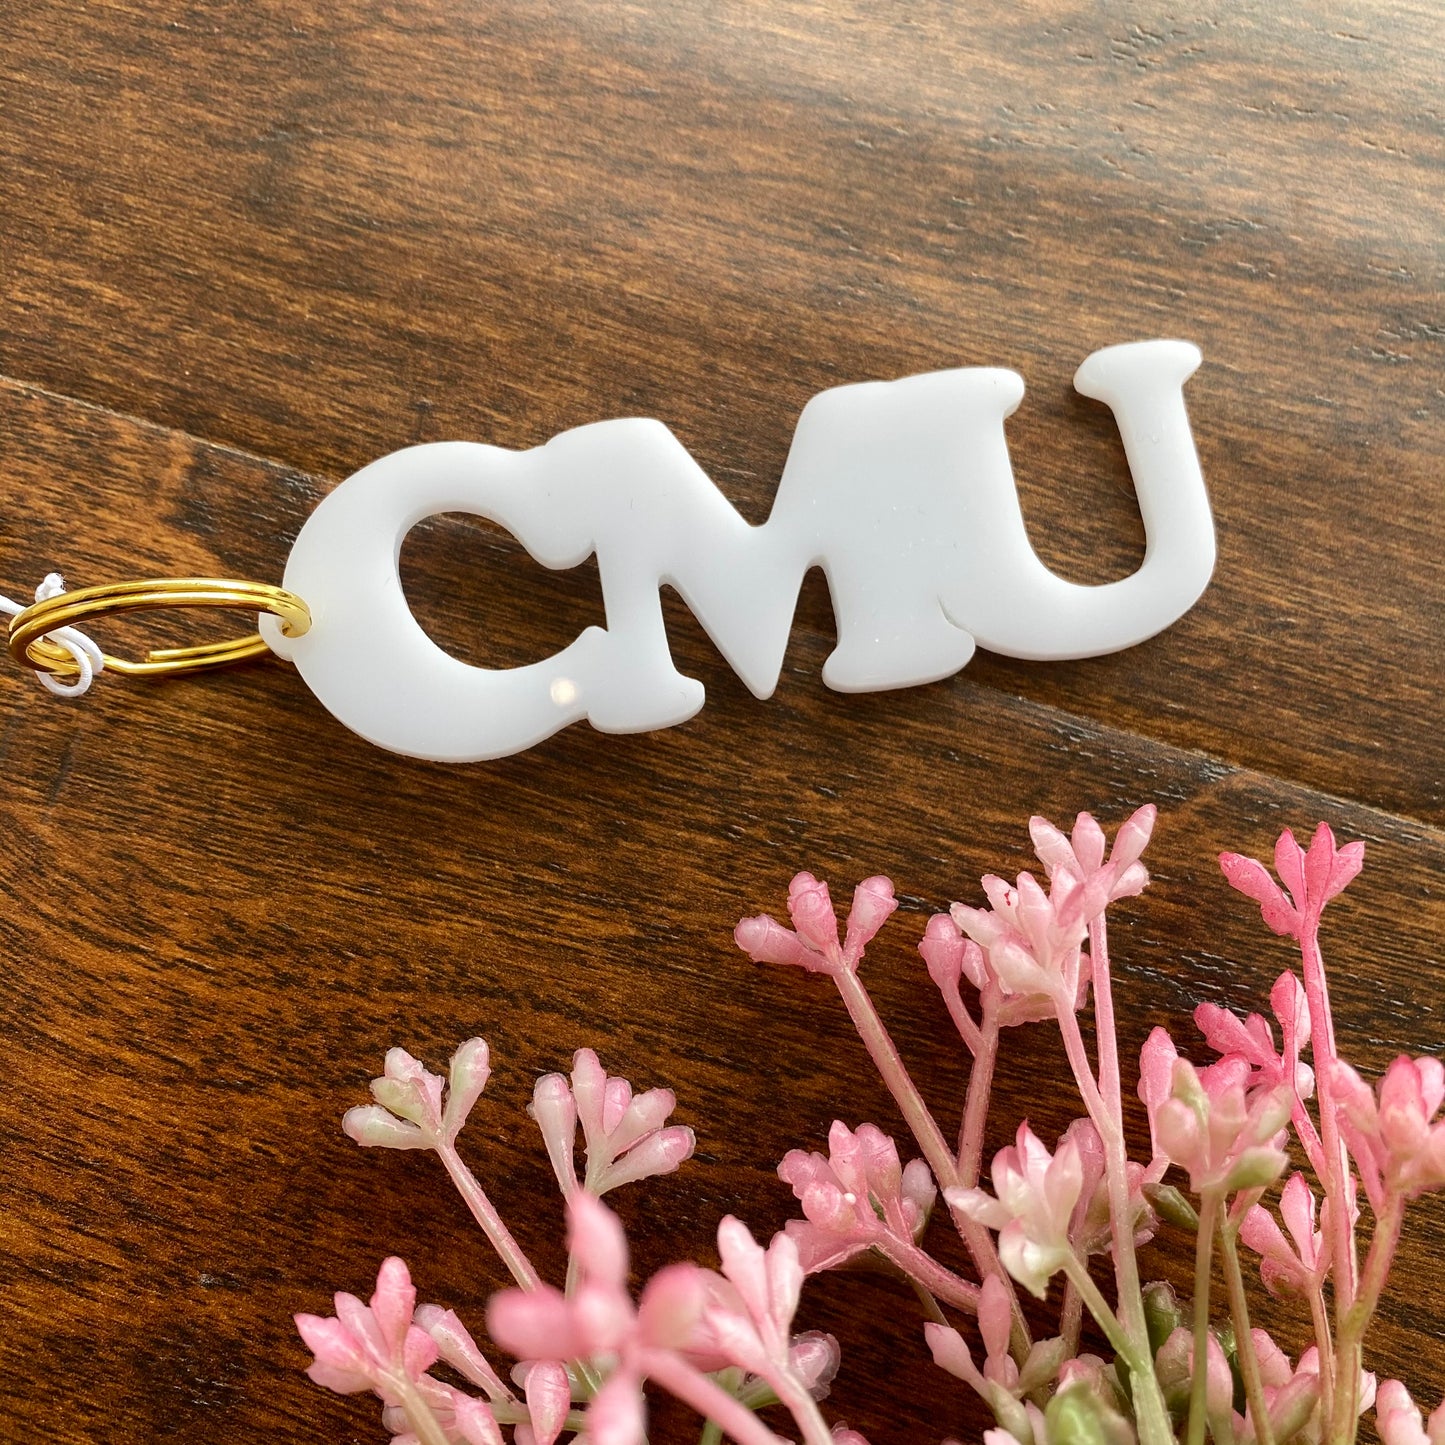 CMU initials in bold font make up white acrylic keychain. It is attached to gold key ring and sitting on a wood surface next to pink florals